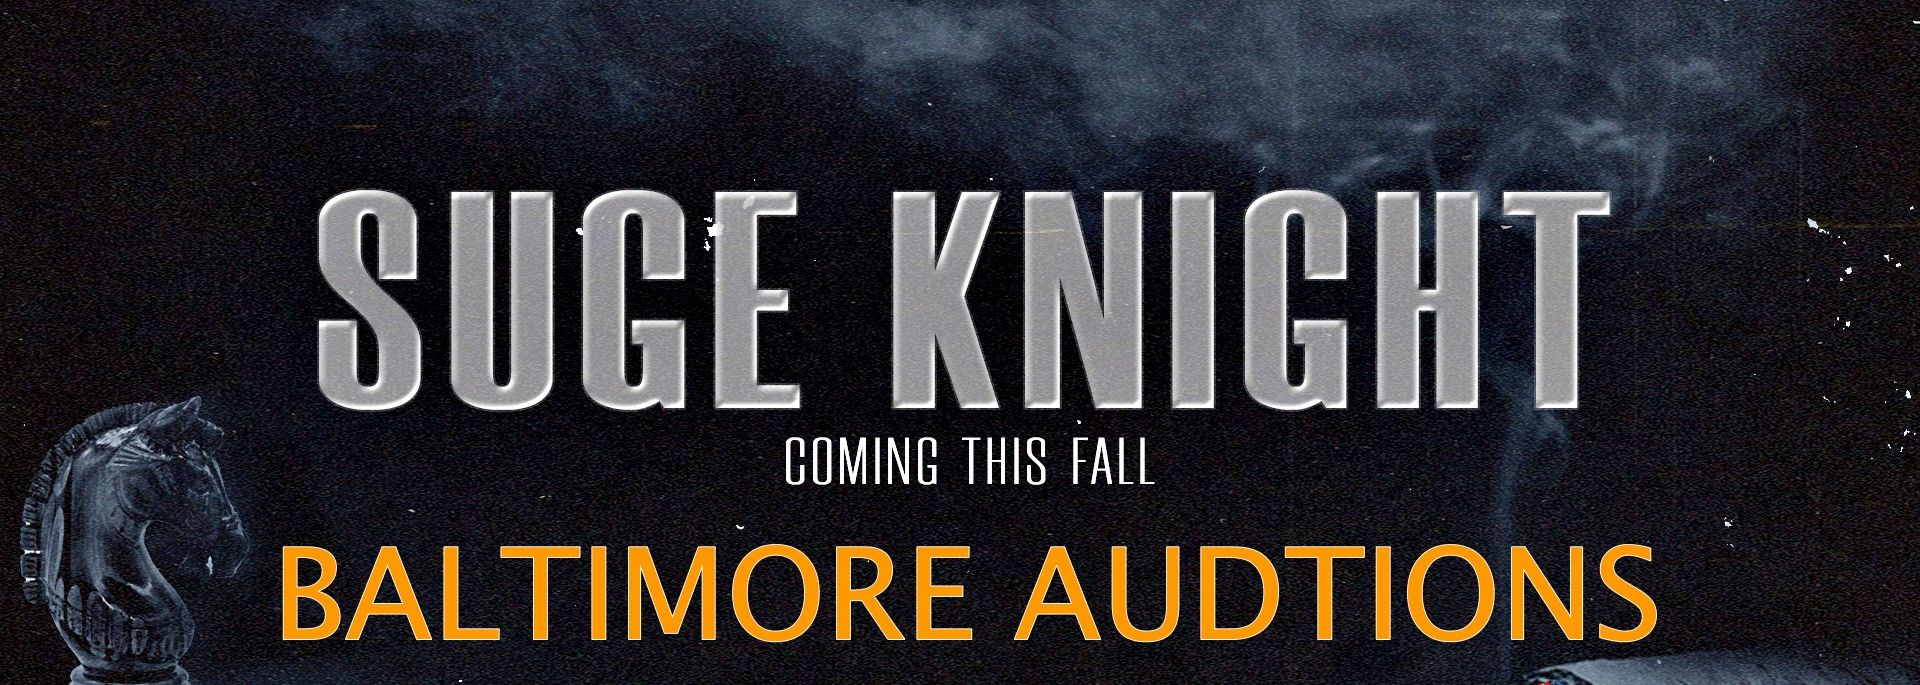 Suge Knight Baltimore Auditions